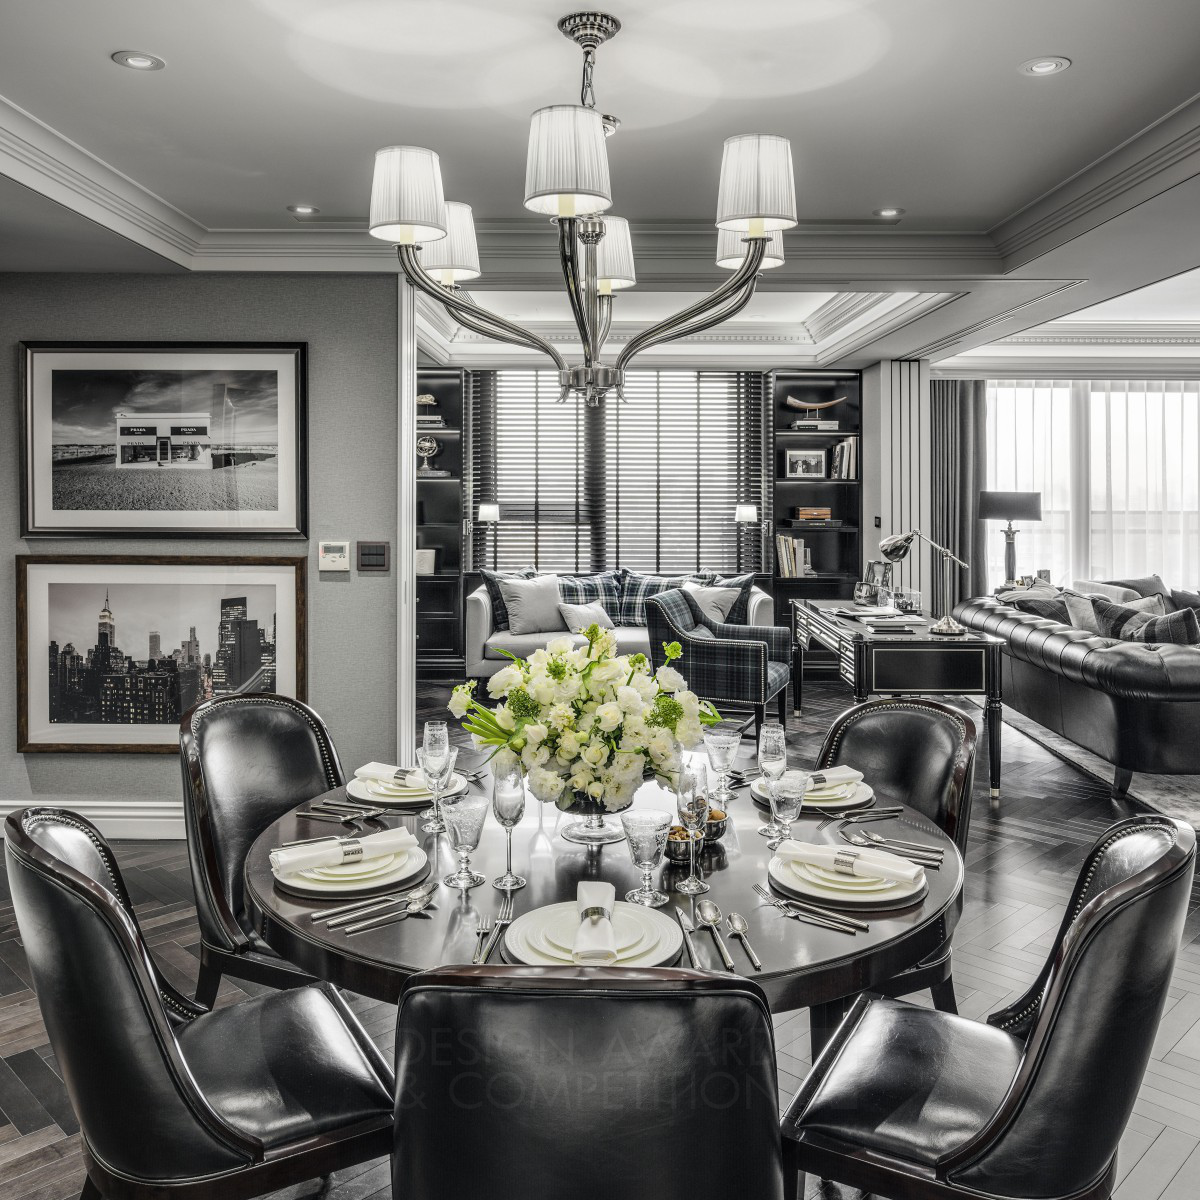 Idan Chiang of L&#039;atelier Fantasia wins Silver at the prestigious A' Interior Space, Retail and Exhibition Design Award with Classic Timeless Bachelor Pad Luxury Residential.